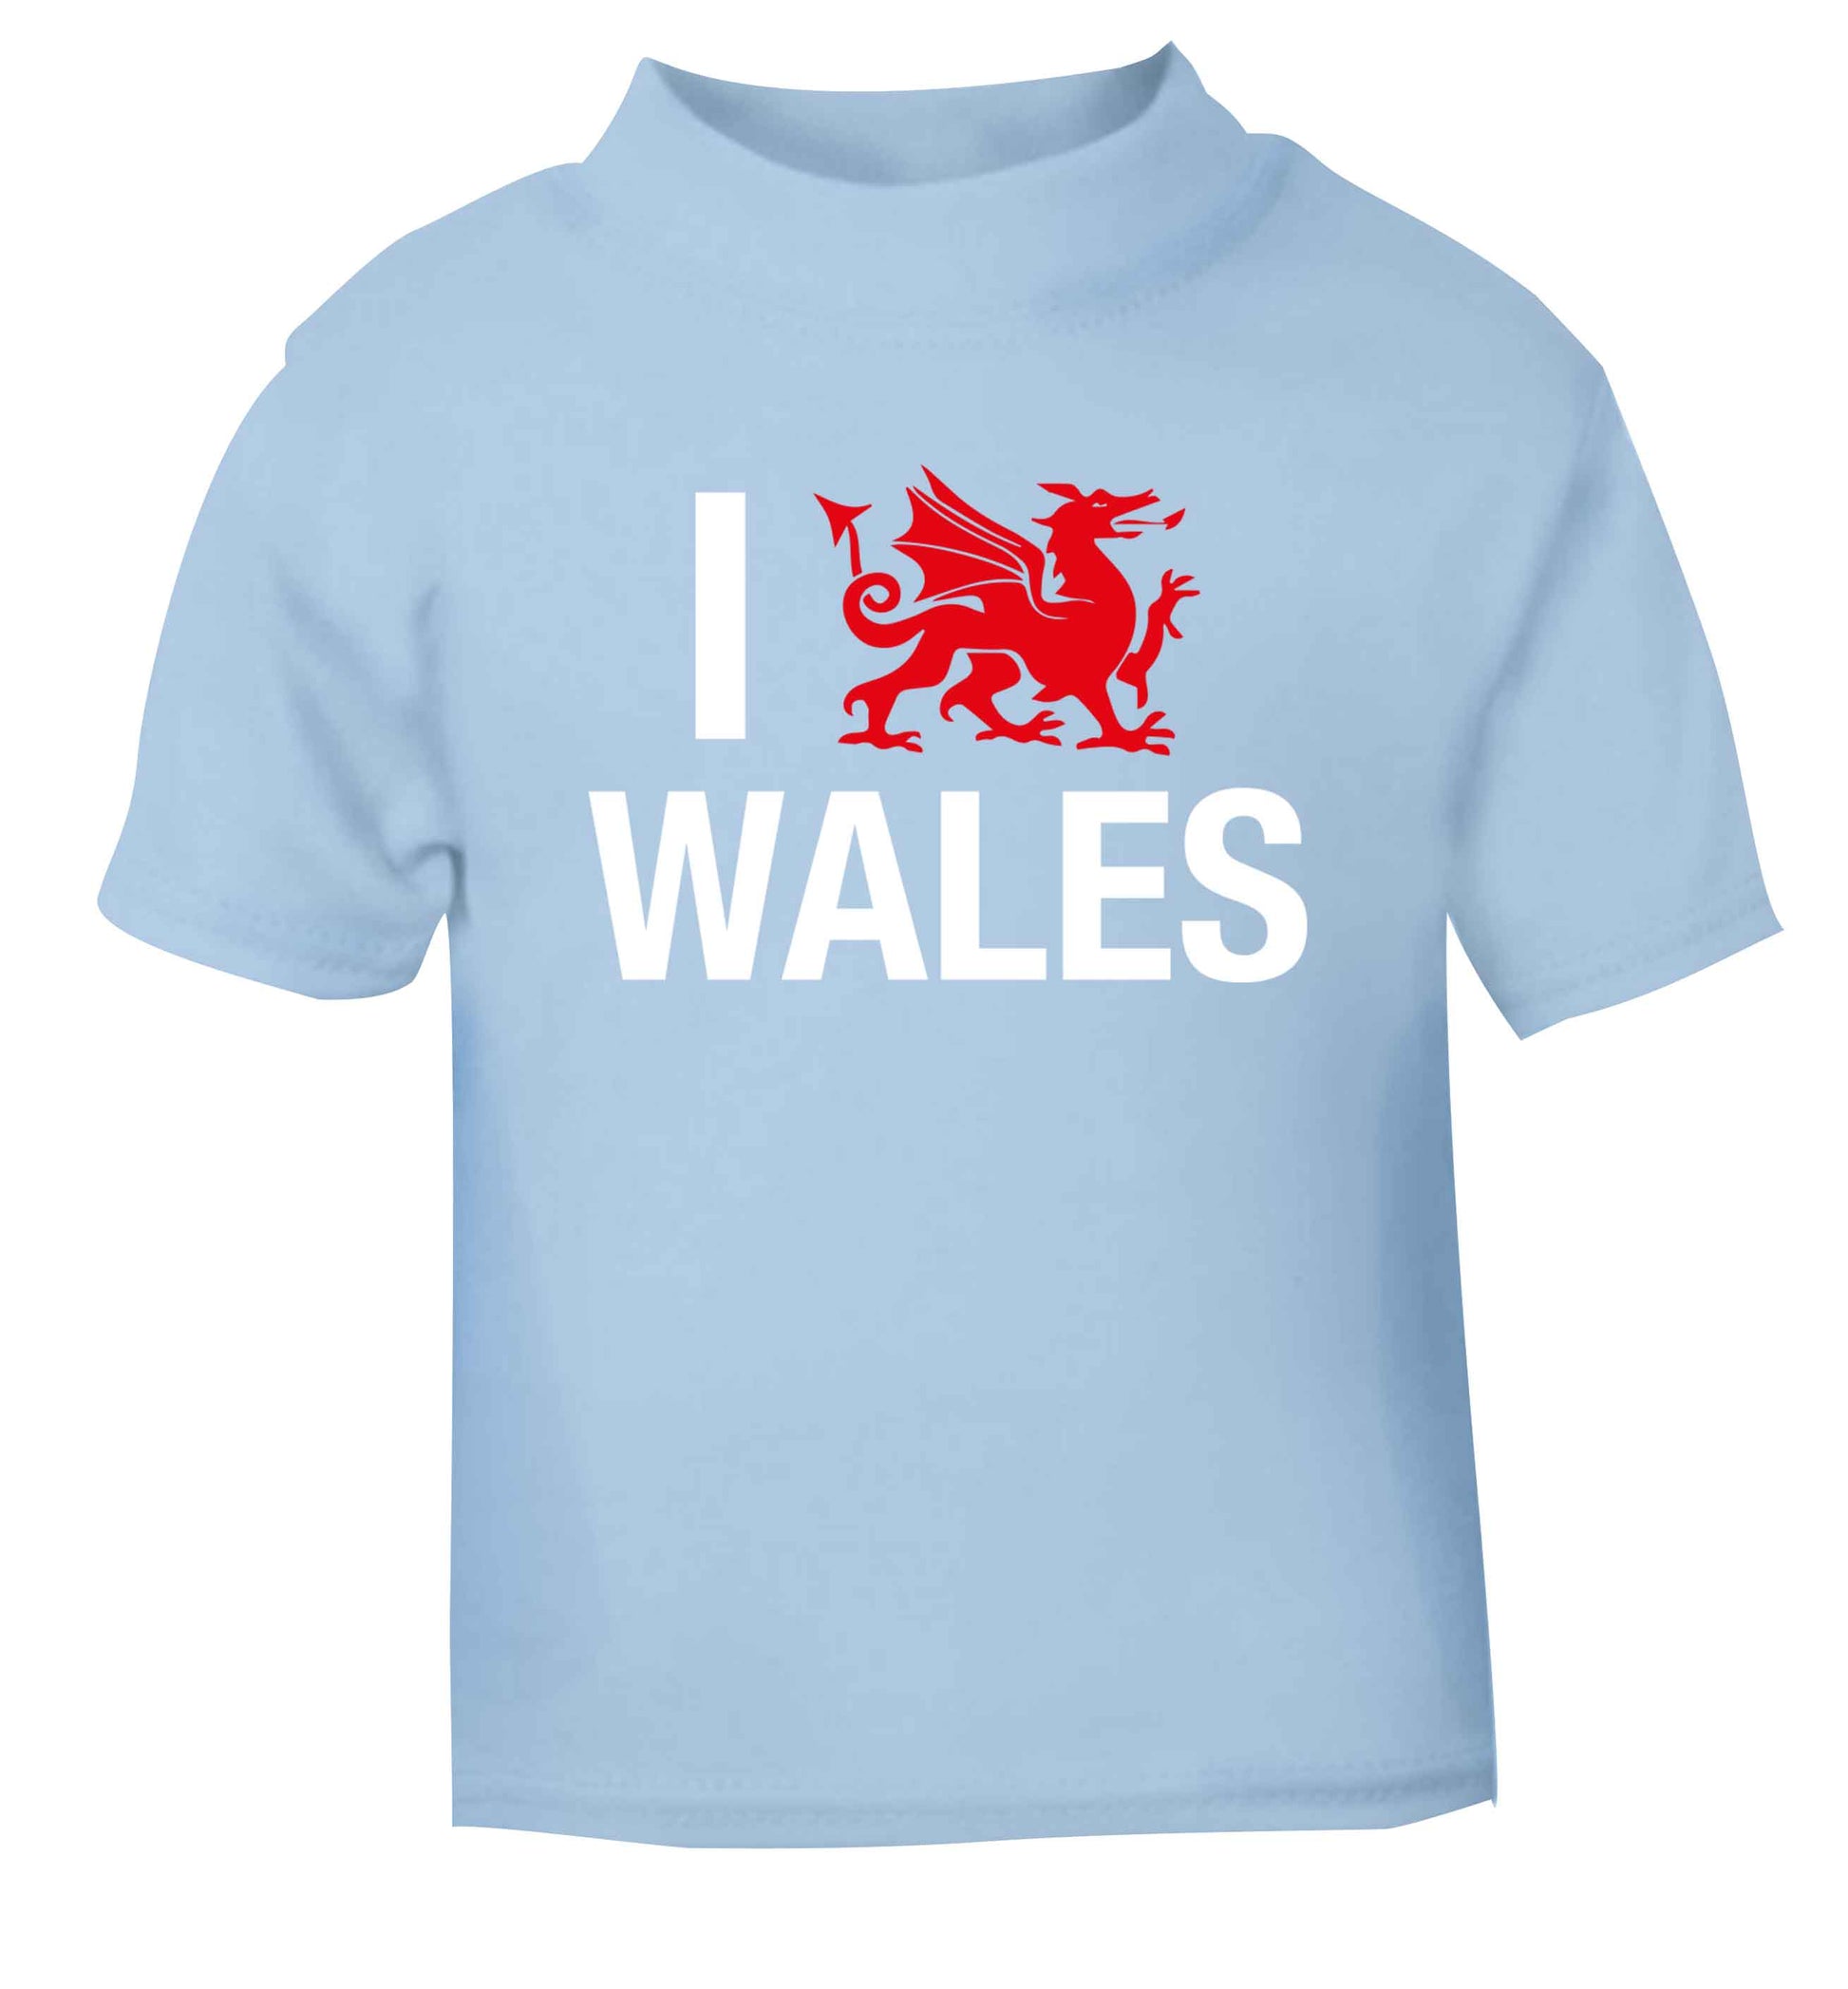 I love Wales light blue Baby Toddler Tshirt 2 Years